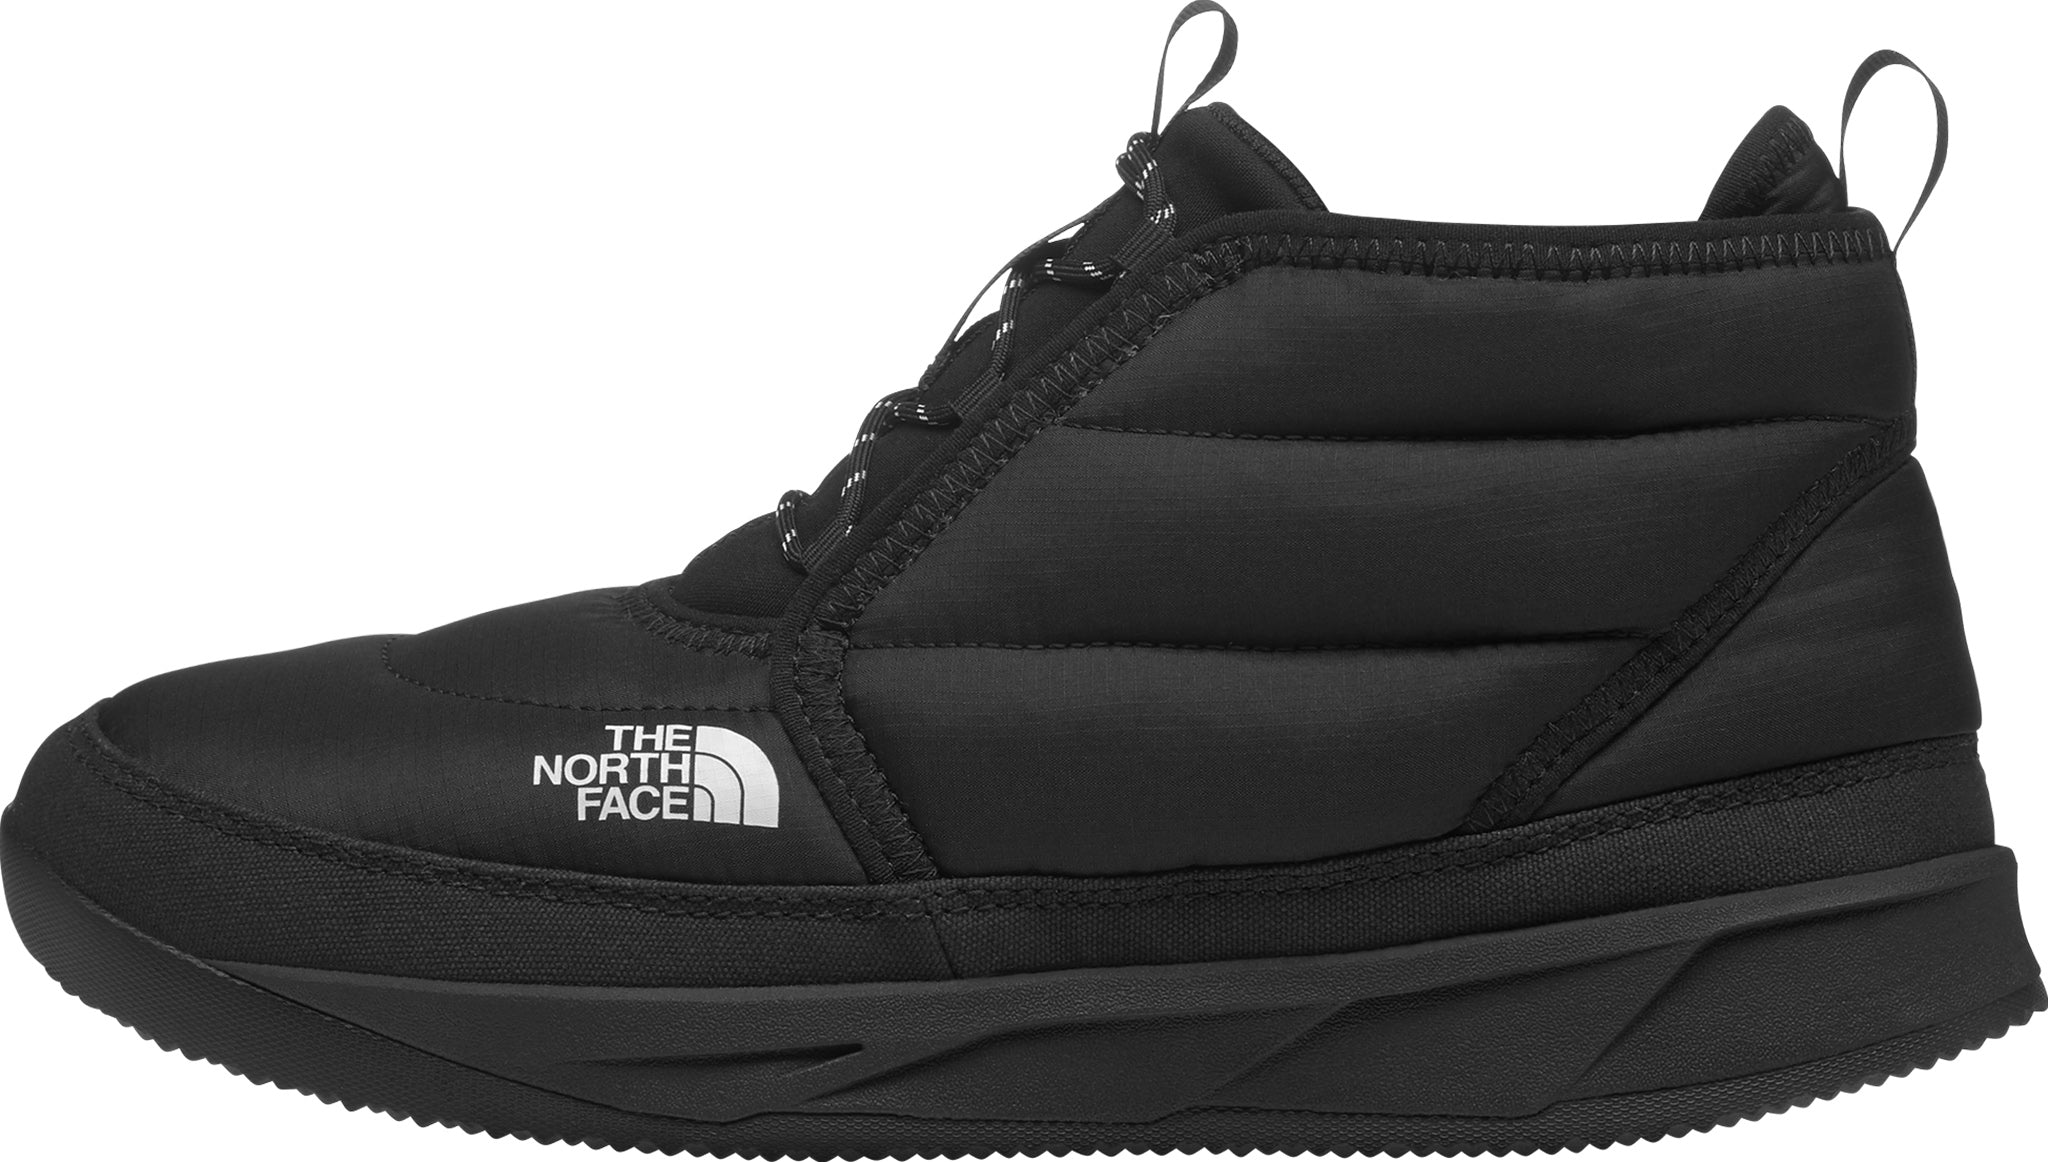 The North Face NSE Chukka Boots - Men’s